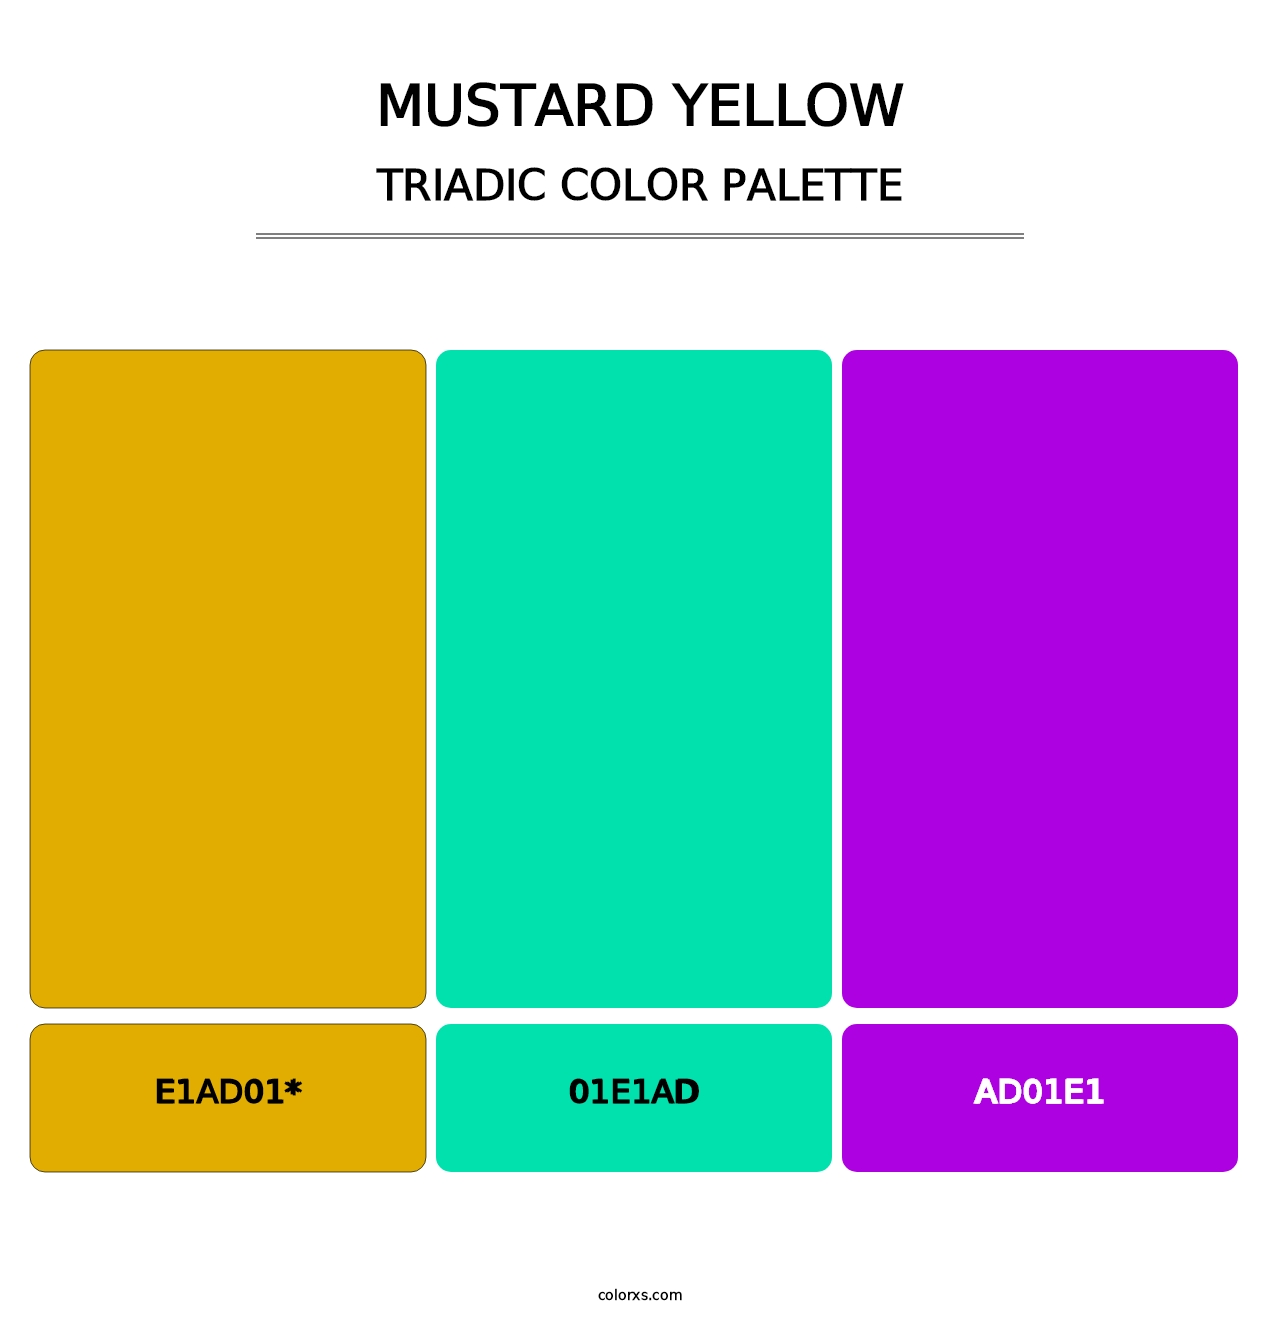 Mustard Yellow - Triadic Color Palette